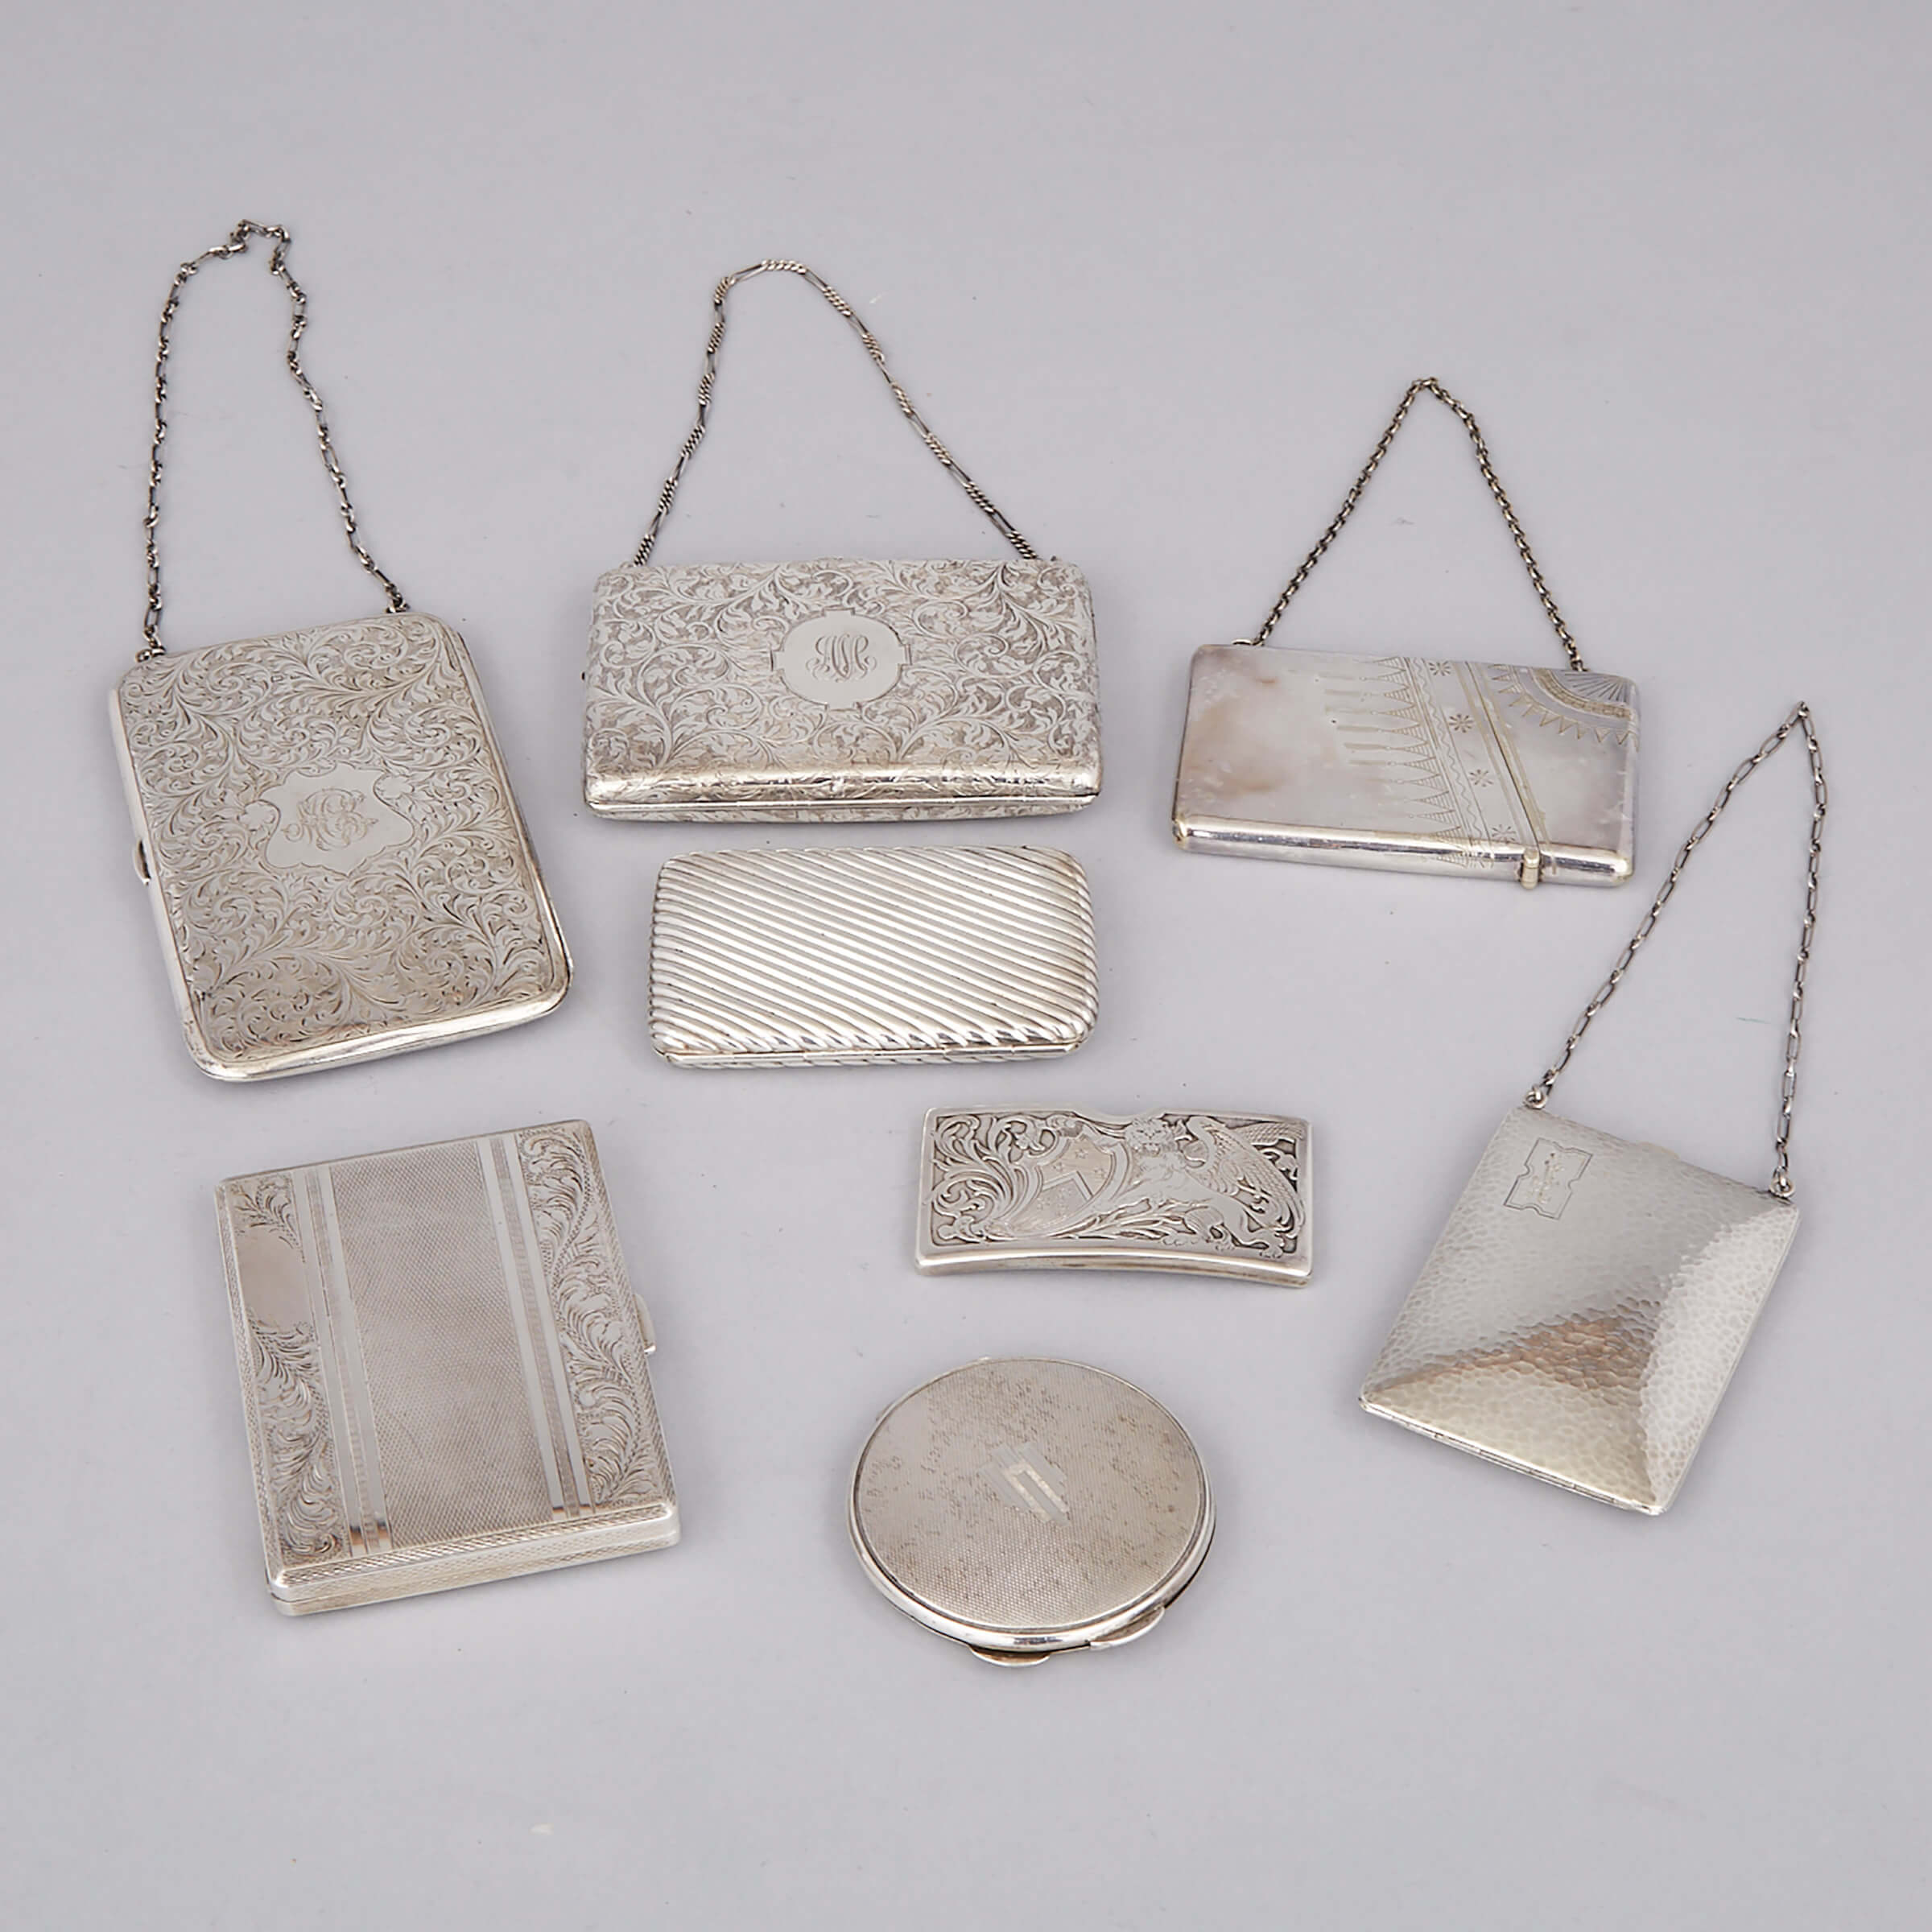 Two Continental Silver Cigarette Cases, English Compact, Three North American Purses and a Card Case, early 20th century